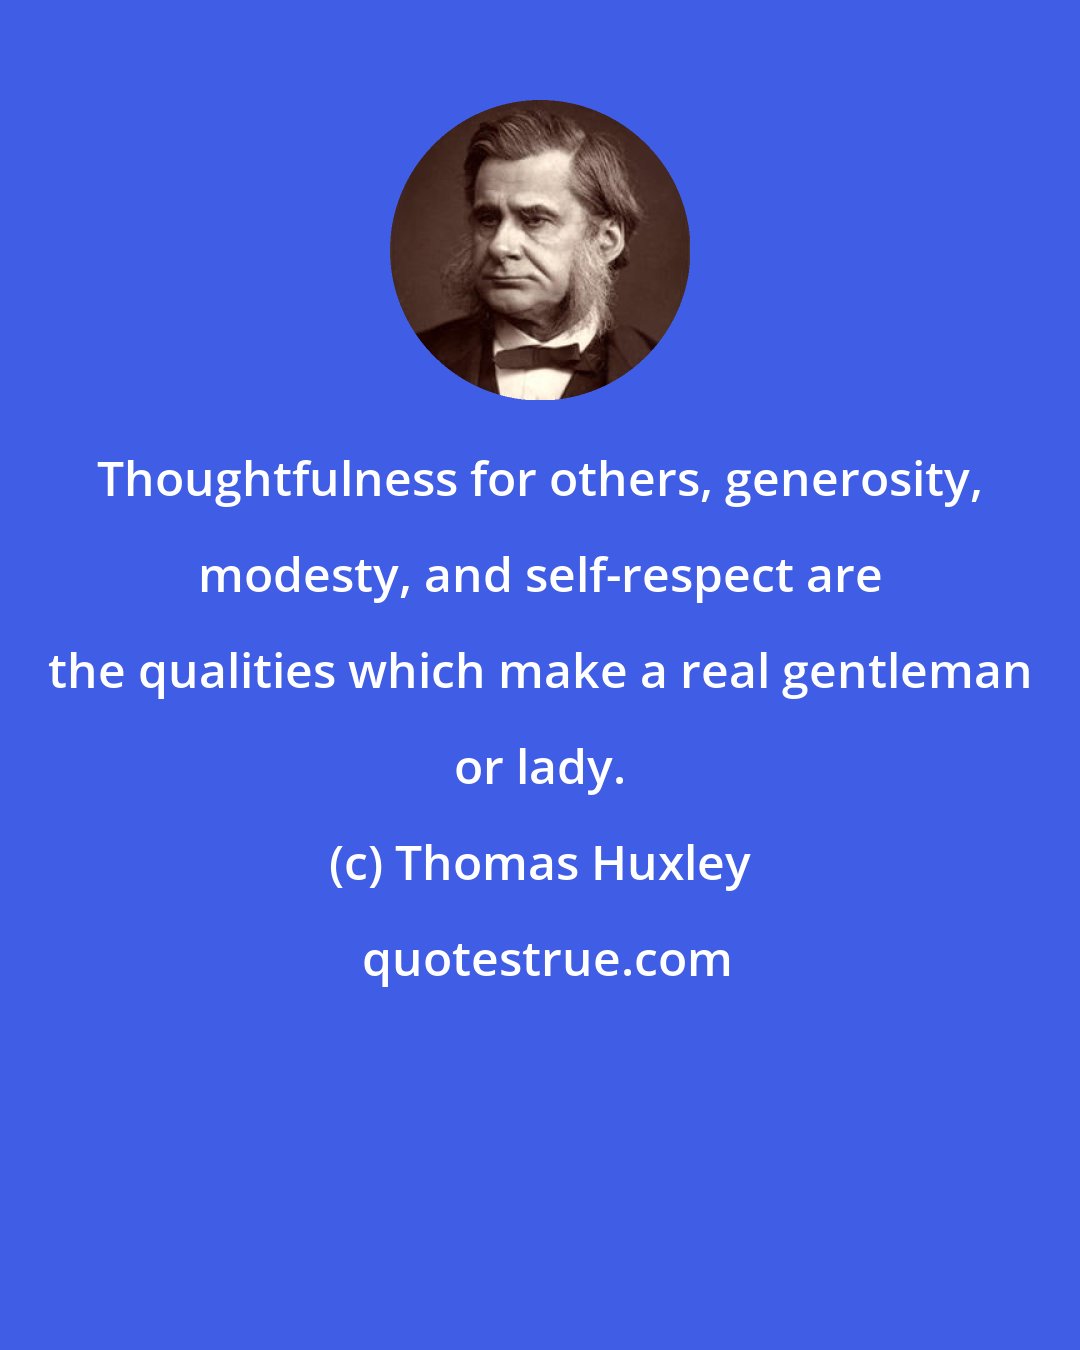 Thomas Huxley: Thoughtfulness for others, generosity, modesty, and self-respect are the qualities which make a real gentleman or lady.